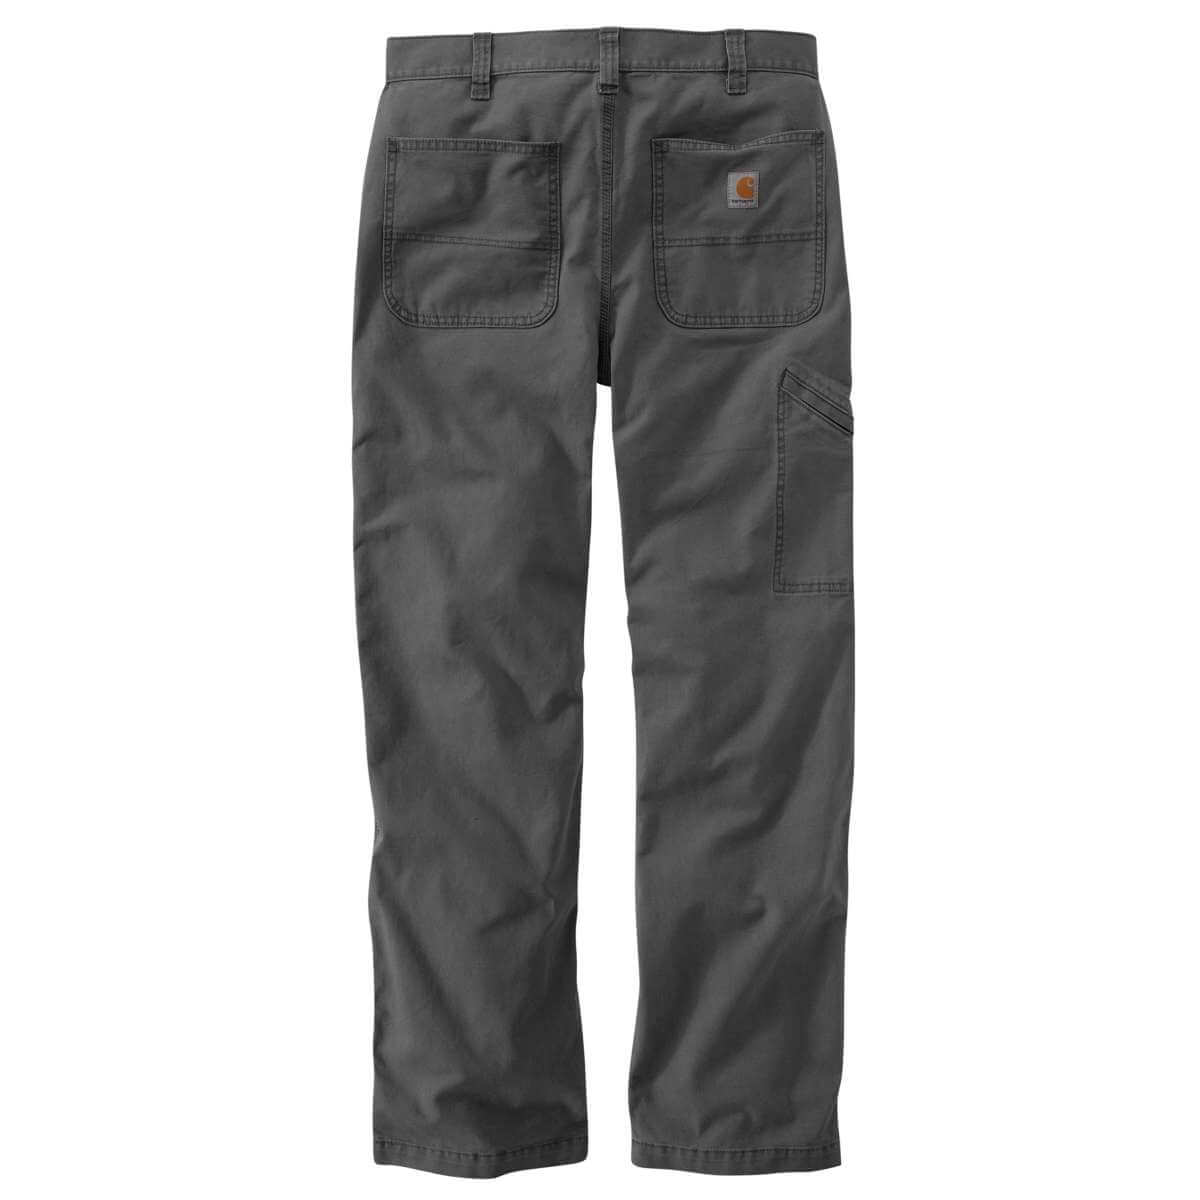 102291 - Carhartt Men's Rugged Flex Relaxed Fit Canvas Work Pant